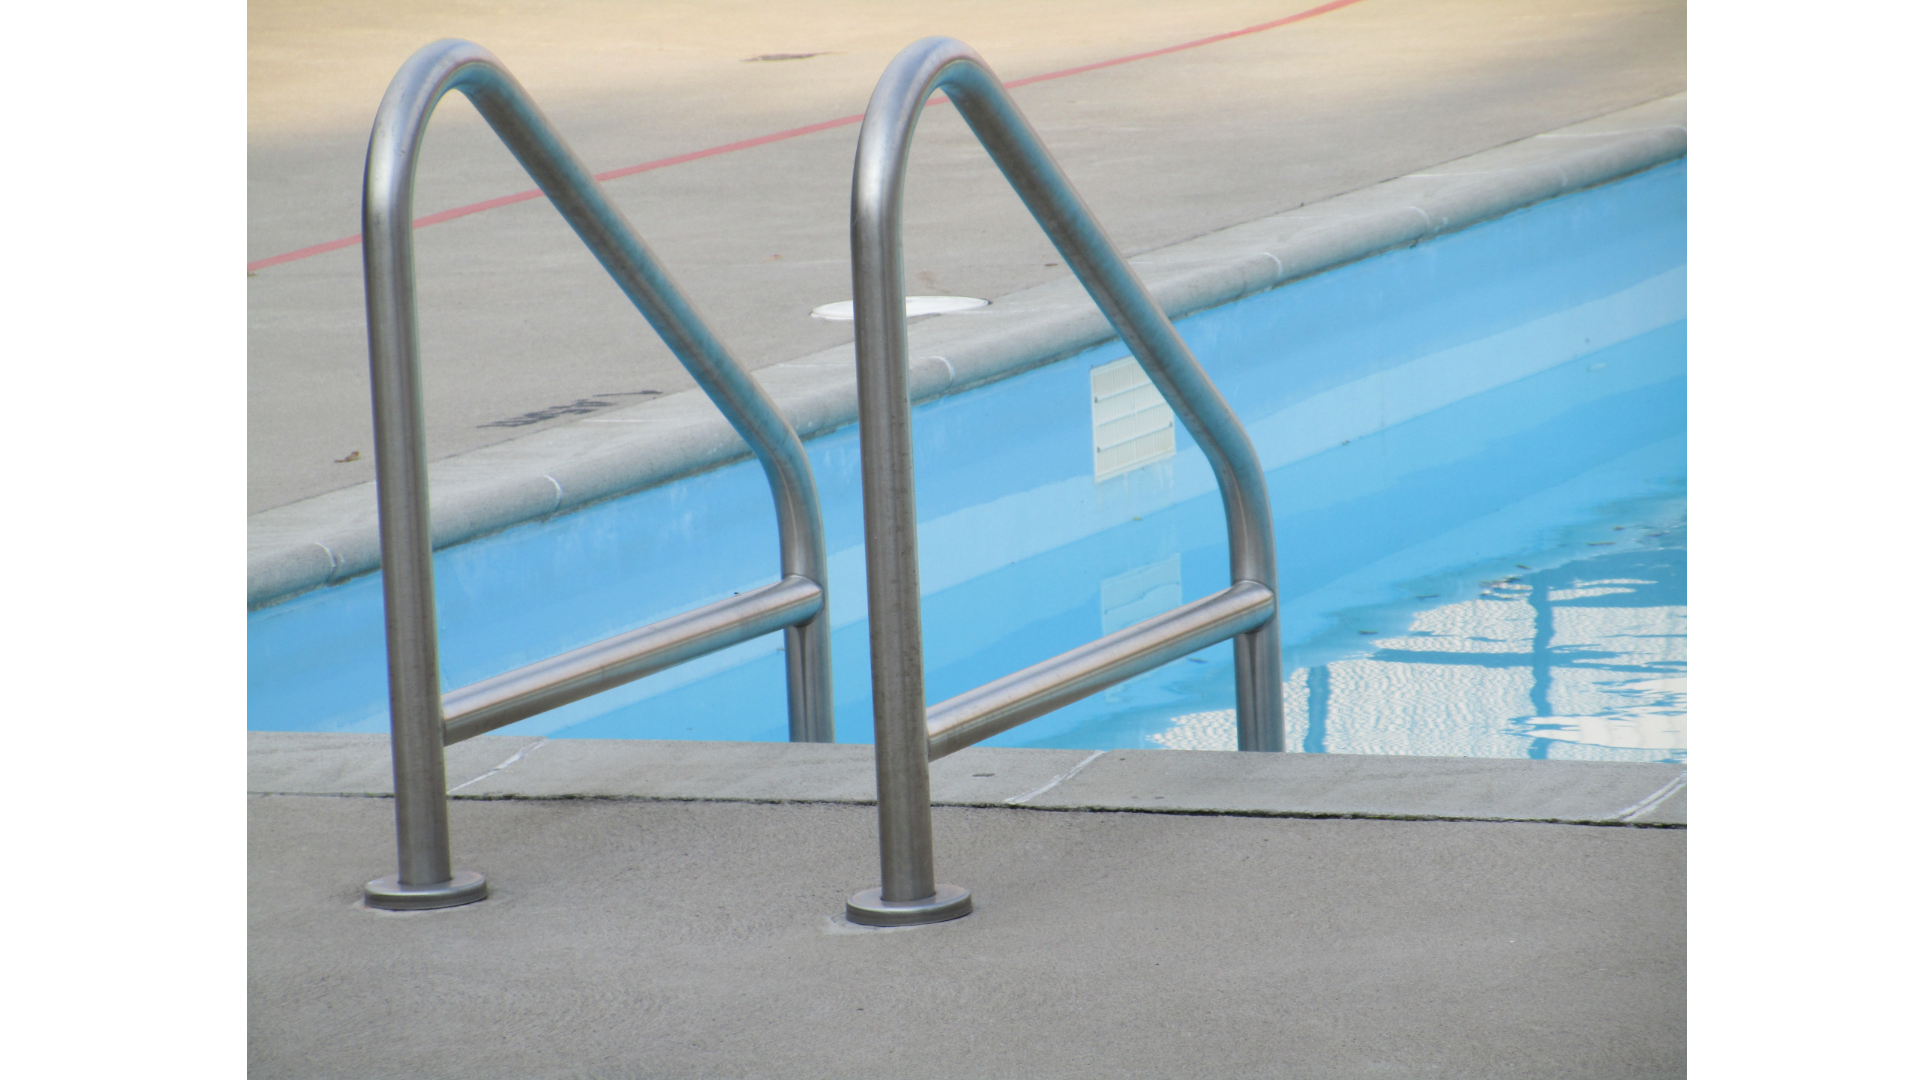 Hamilton’s outdoor pools not expecting lifeguard shortage in 2023 due to intensified recruitment